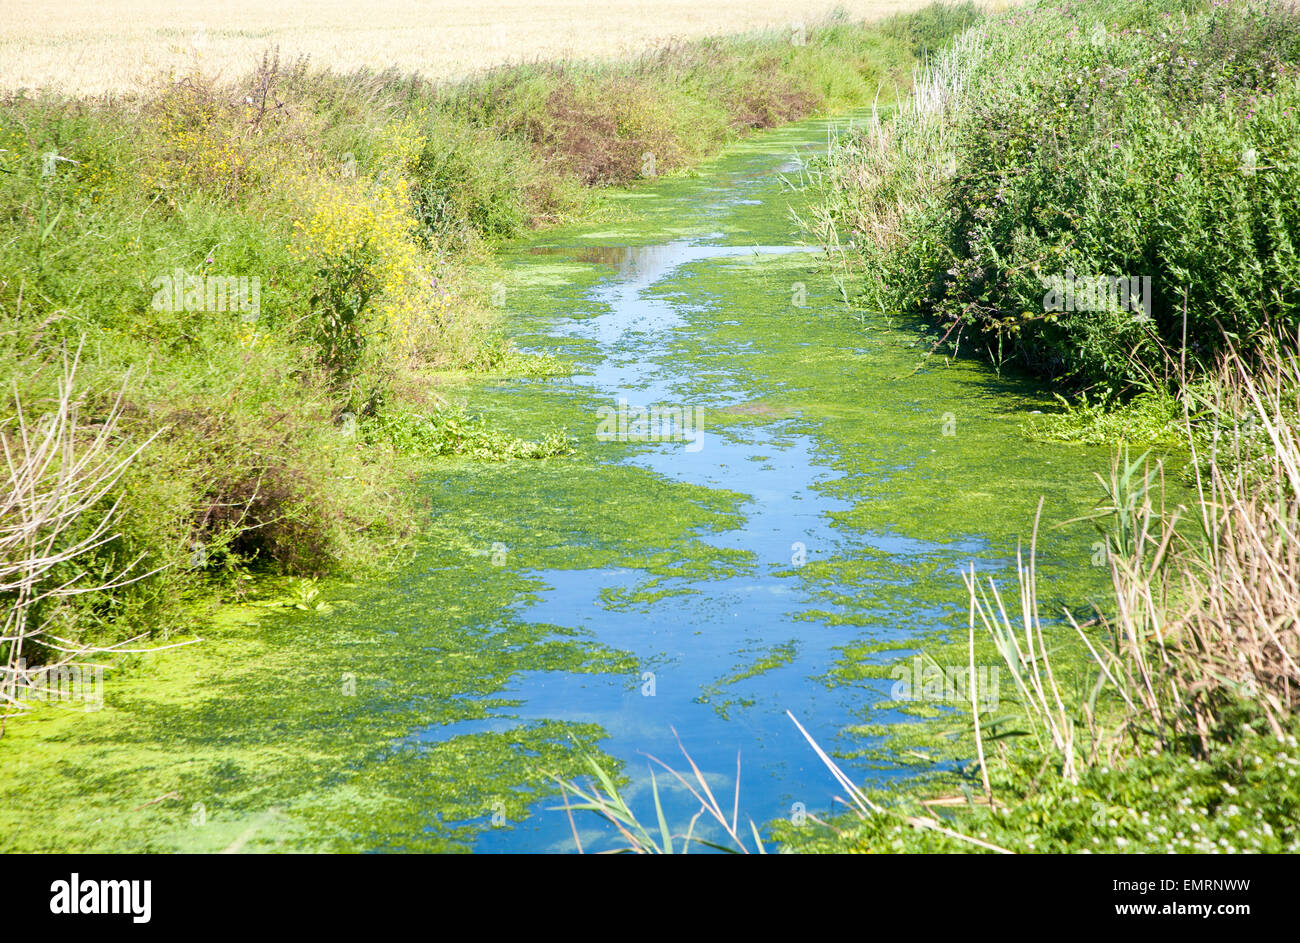 Drainage ditch with green pond weed algae caused by eutrophication, Hollesley marshes, Suffolk, England, UK Stock Photo